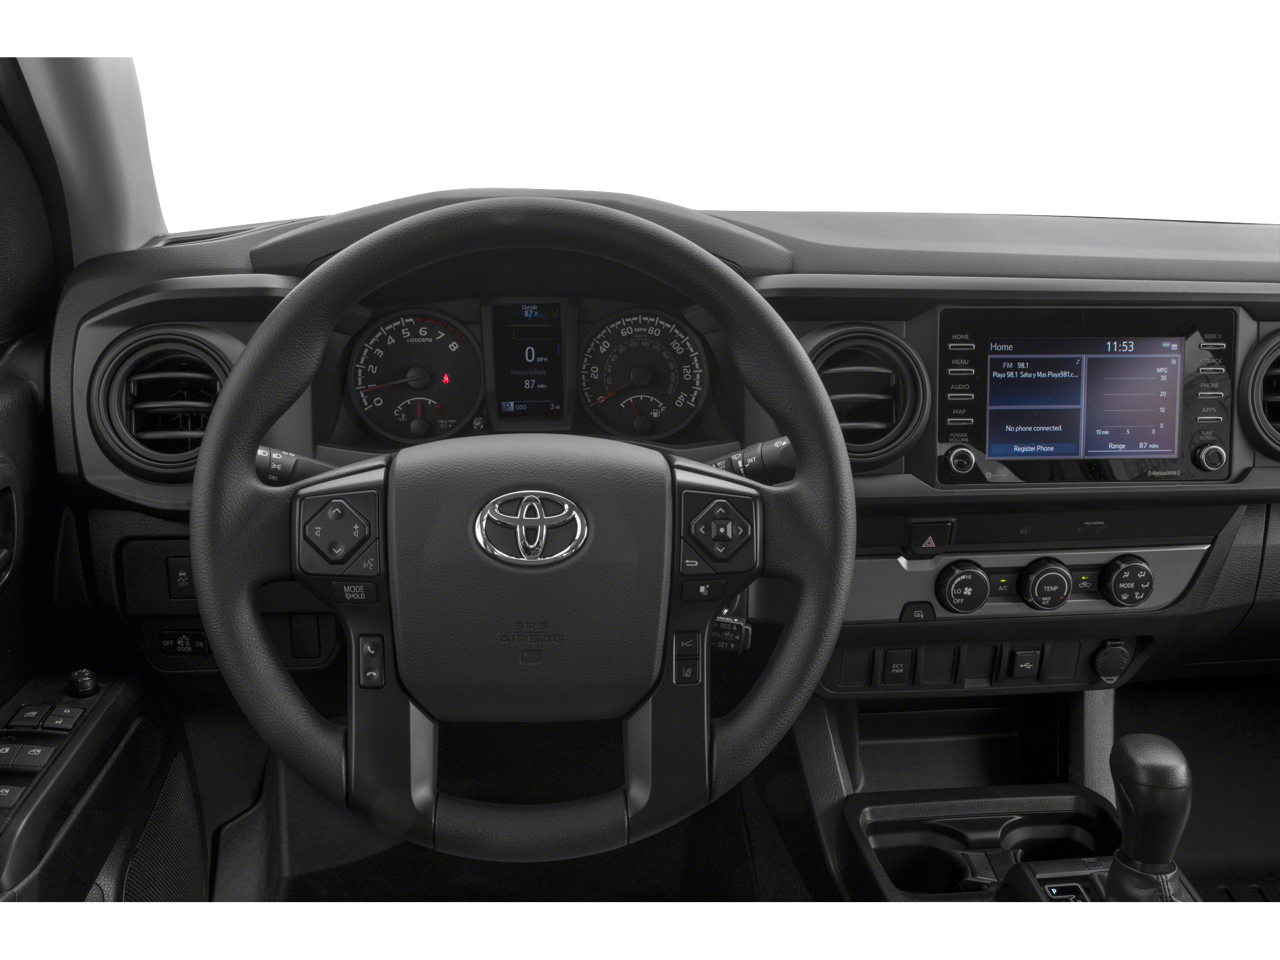 2021 Toyota Tacoma 4WD SR Double Cab *1-OWNER*